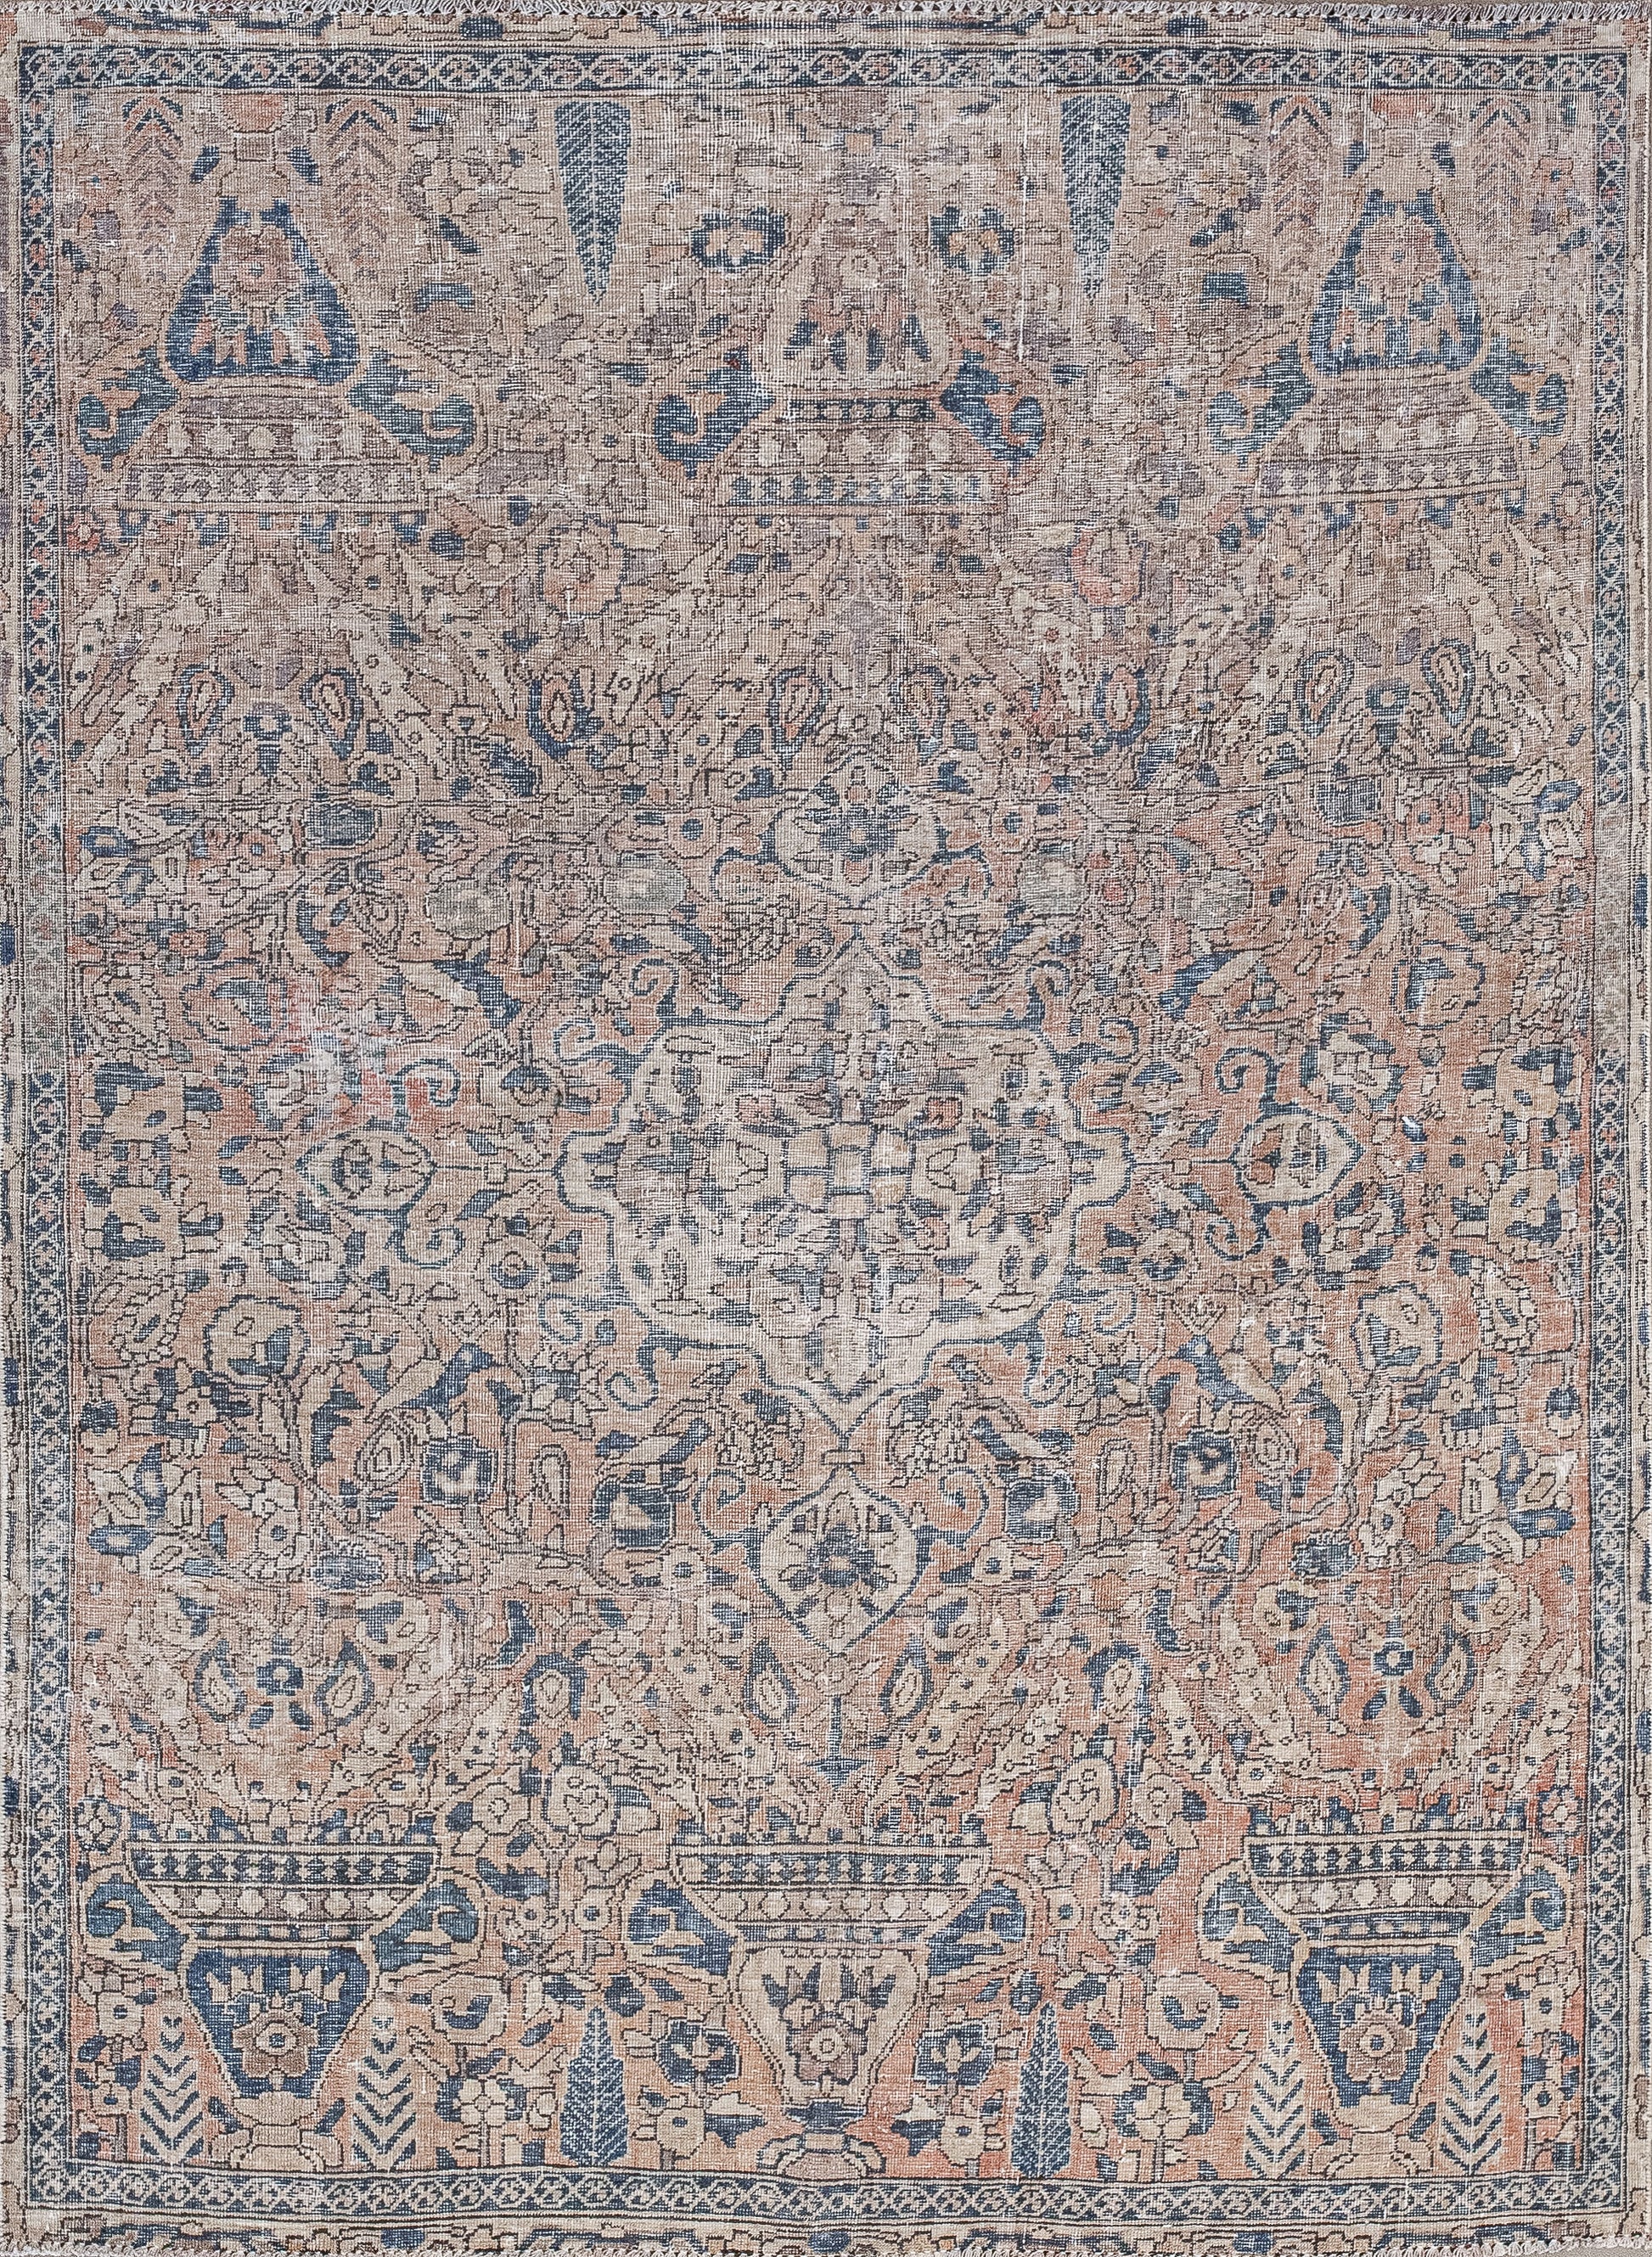 This gorgeous rug was woven down to earth, with serious colors signifying structure, stability, and support. The color palette has a brown background, variations of beige for the pattern, and blue.